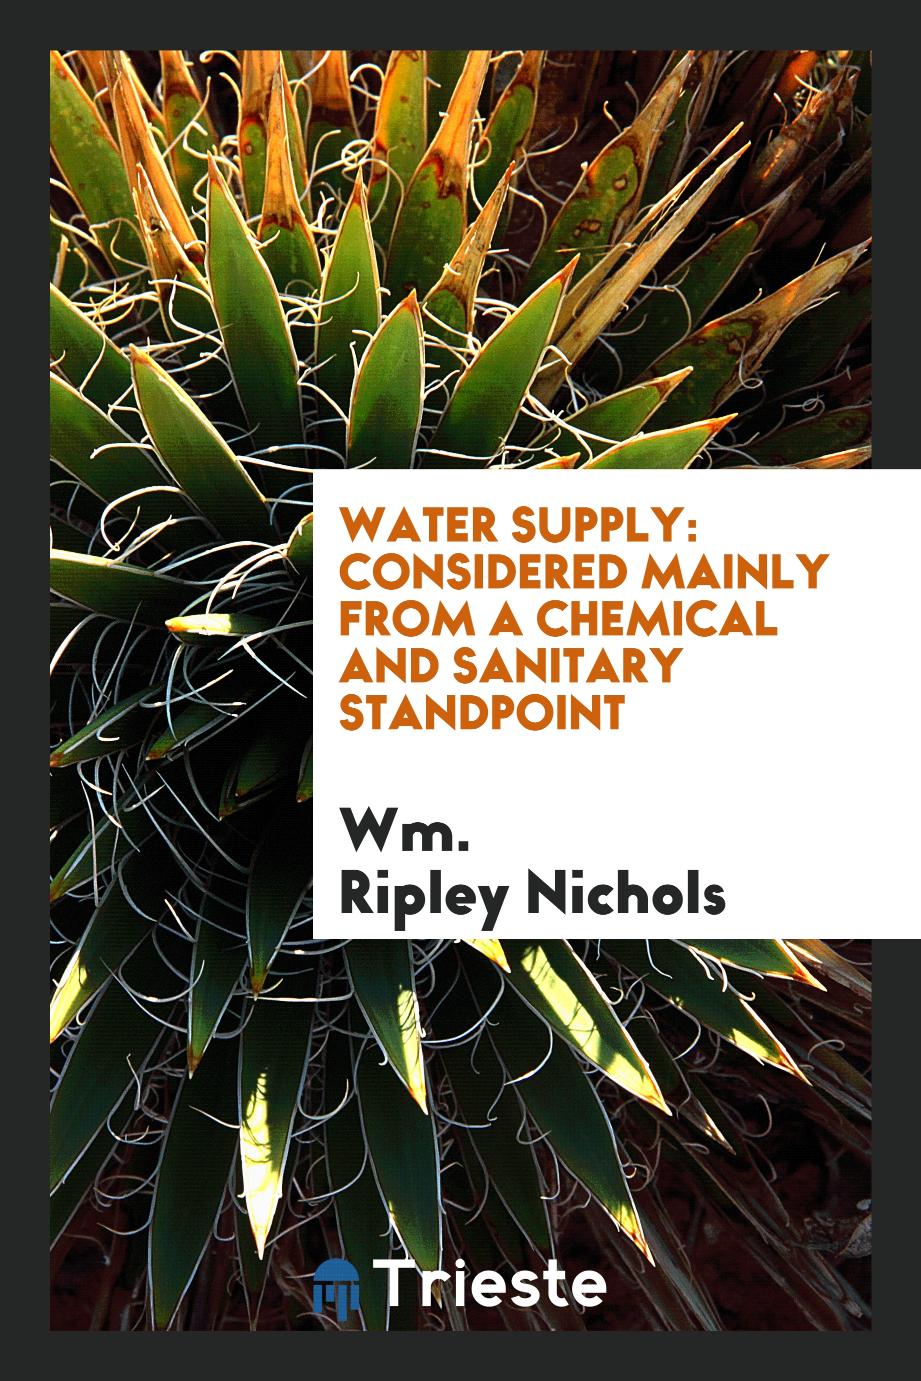 Water Supply: Considered Mainly from a Chemical and Sanitary Standpoint